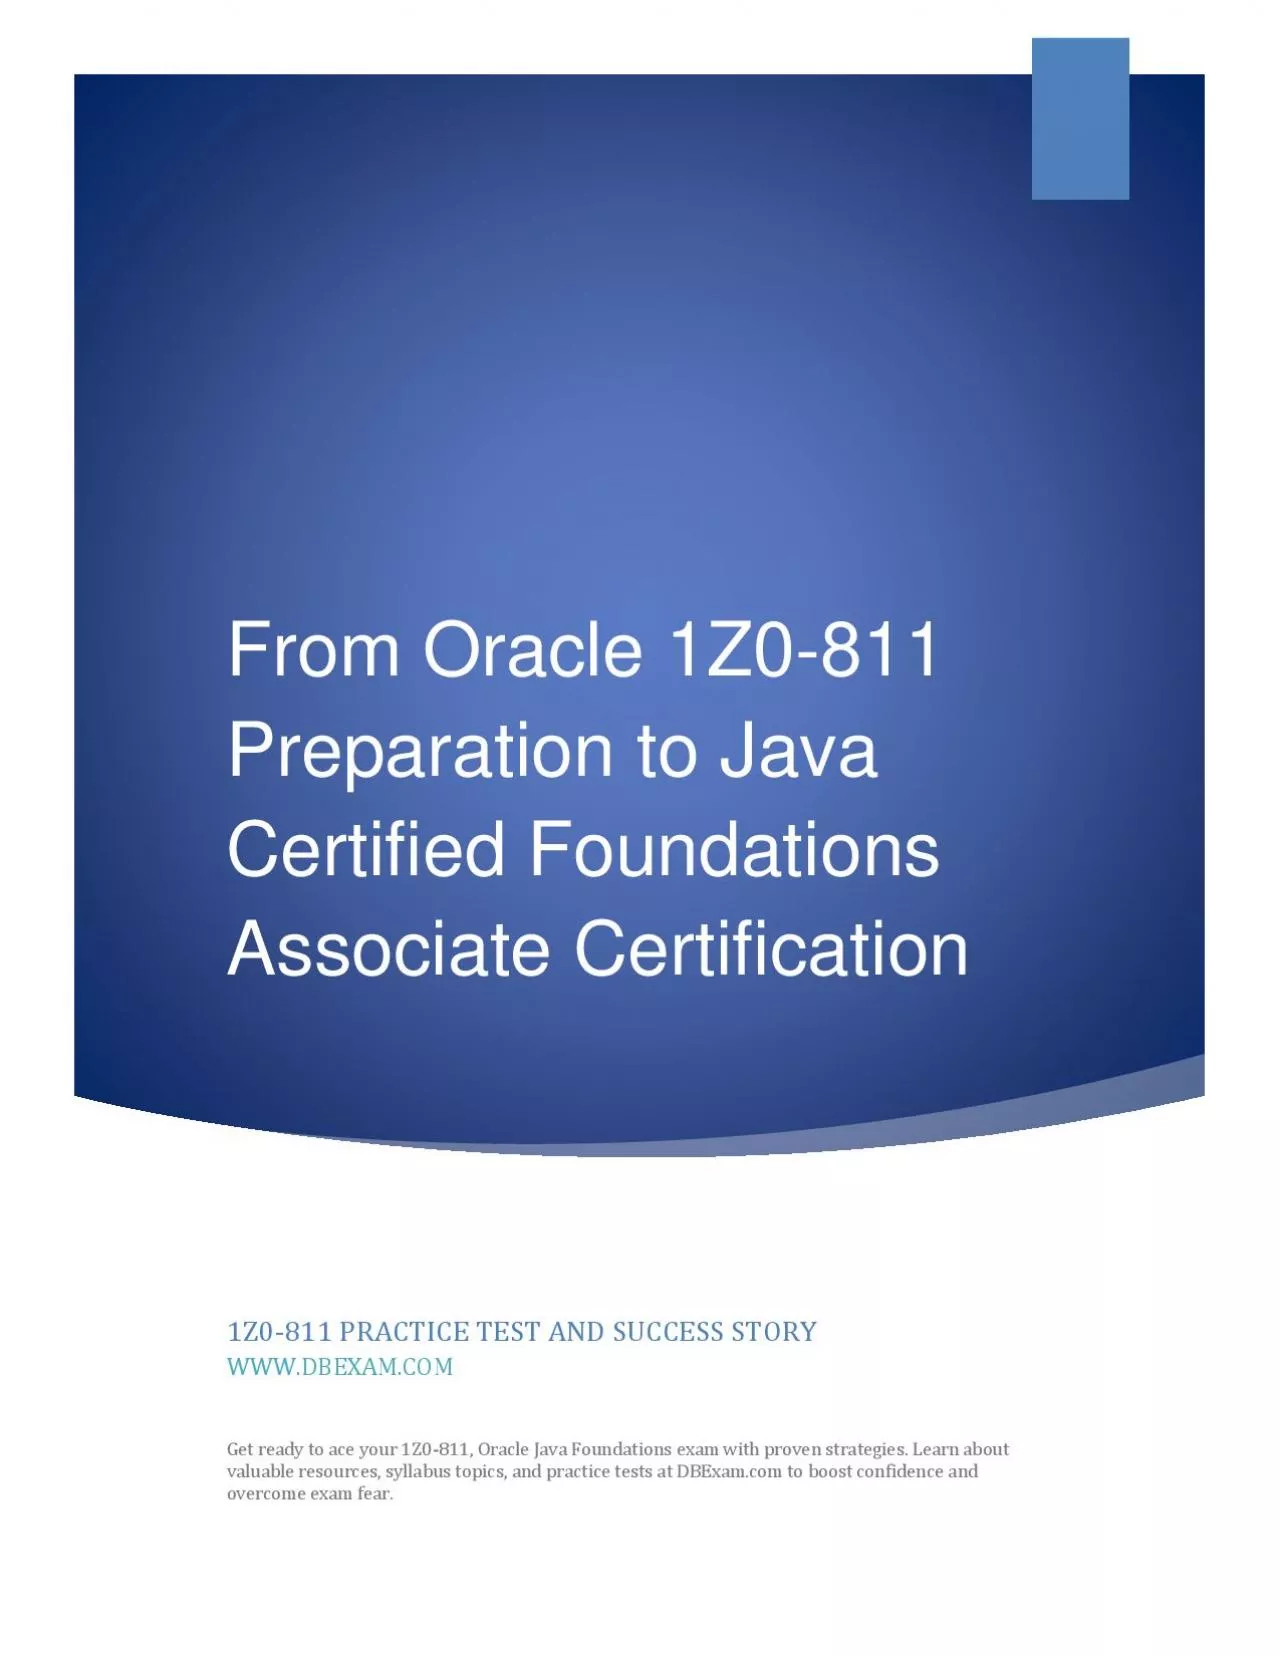 From Oracle 1Z0-811 Preparation to Java Certified Foundations Associate Certification